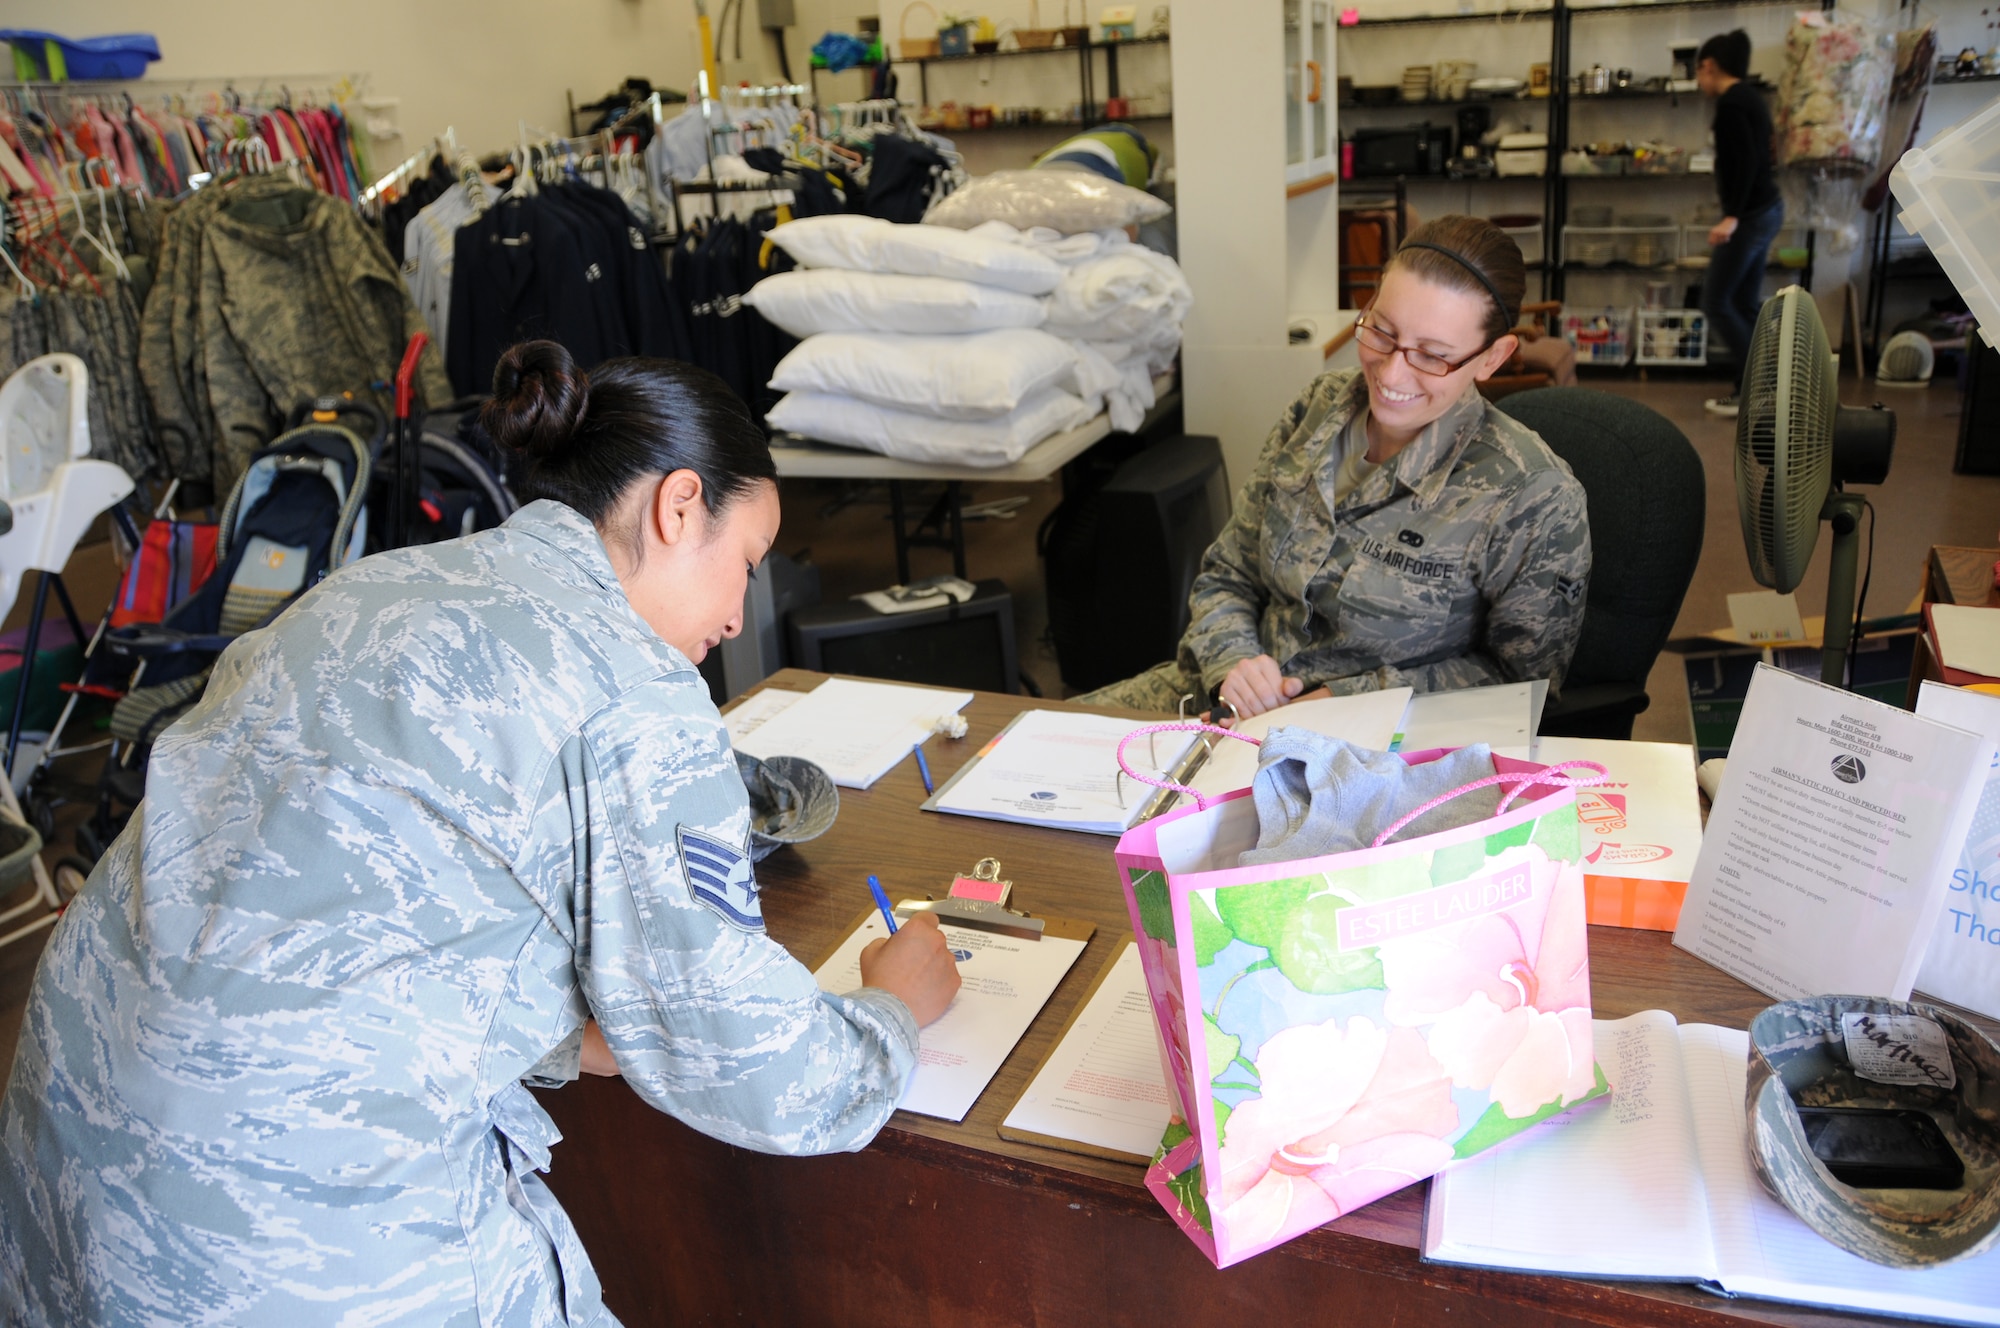 Staff Sgt. Connie Martinez (left), Air Force Mortuary Affairs Operations, lists a description of the items she chose from the display racks at the Airman's Attic, April 24, 2013, Dover Air Force Base, Del. Airman 1st Class Lori Cord, 436th Aircraft Maintenance Squadron, is one of  the organization's volunteers who spends her free time assisting Attic patrons with their selections. (U.S. Air Force photo/Senior Airman Joe Yanik) 